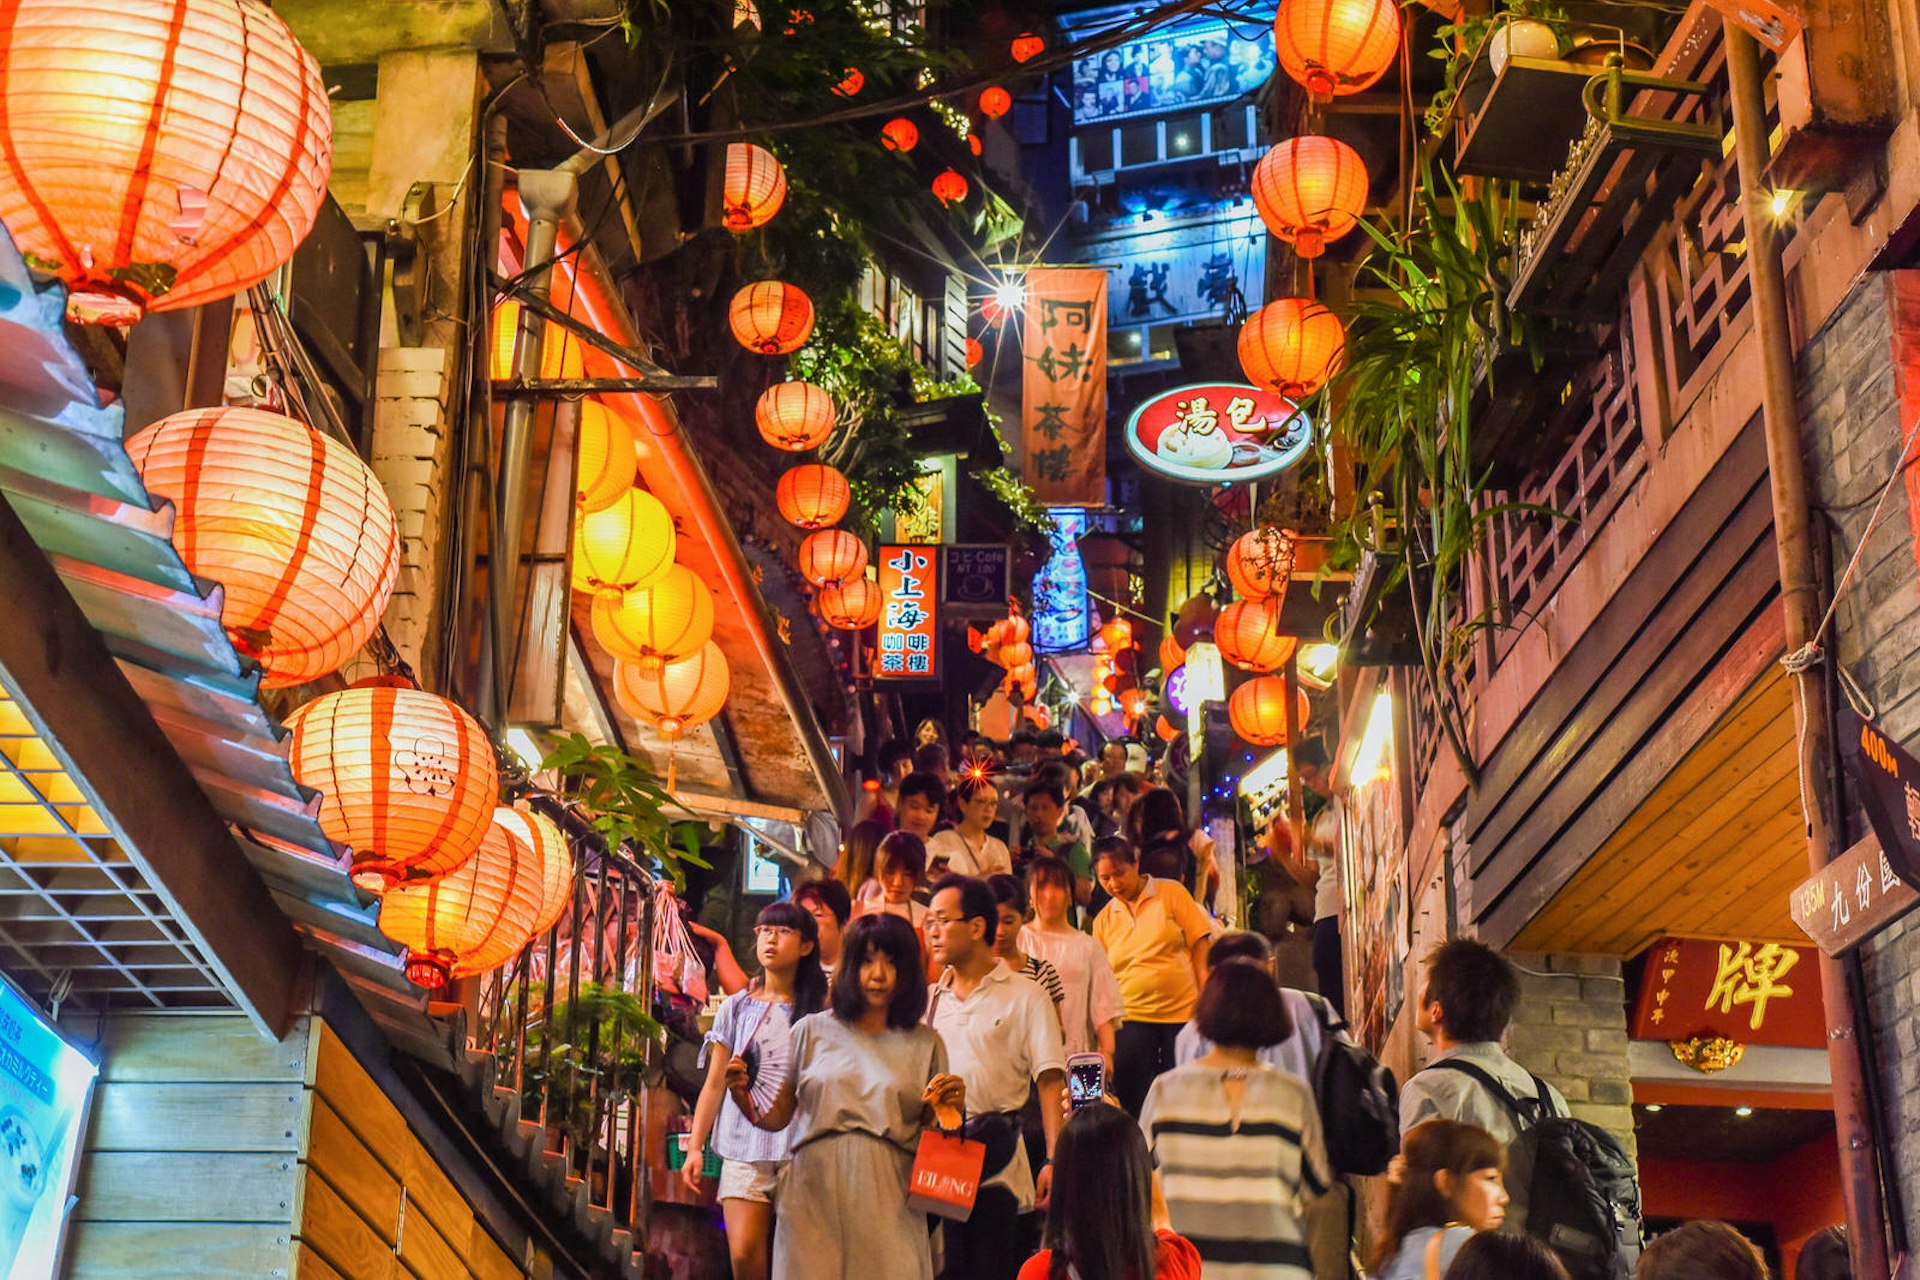 A busy street at night in Taipei, lit by lanterns.